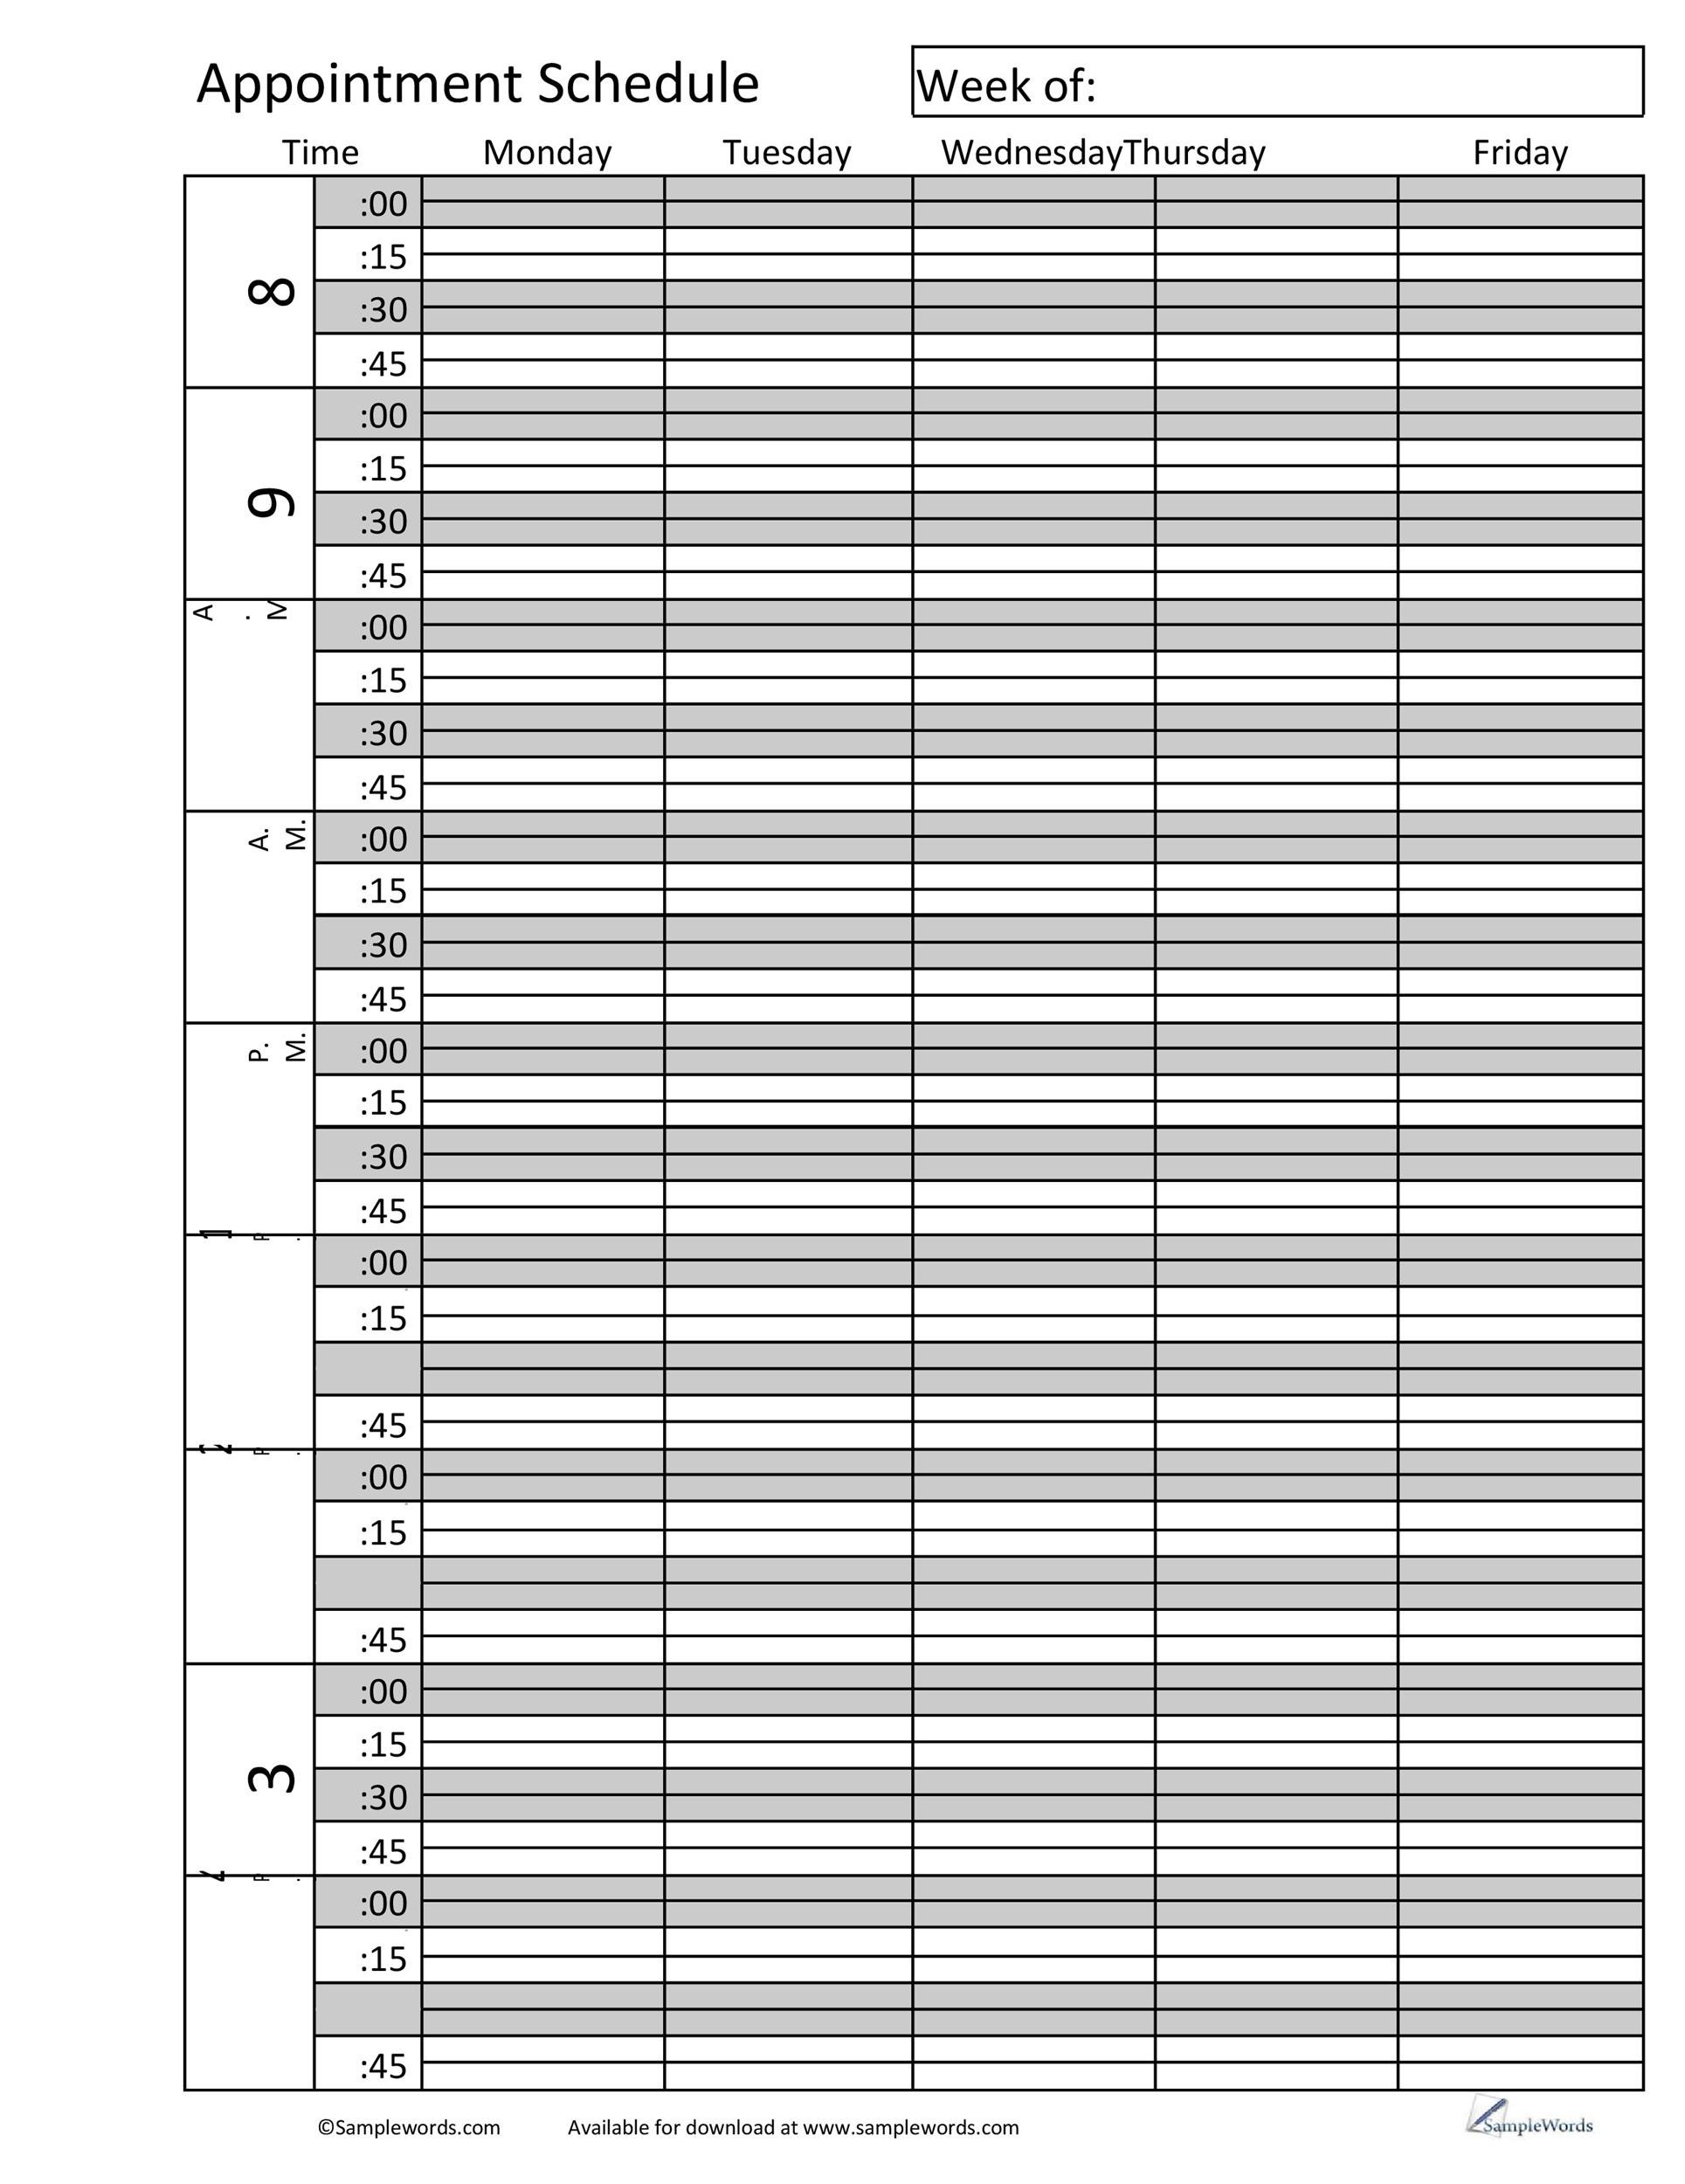 Free Printable Daily Appointment Schedule Template Monitoring 